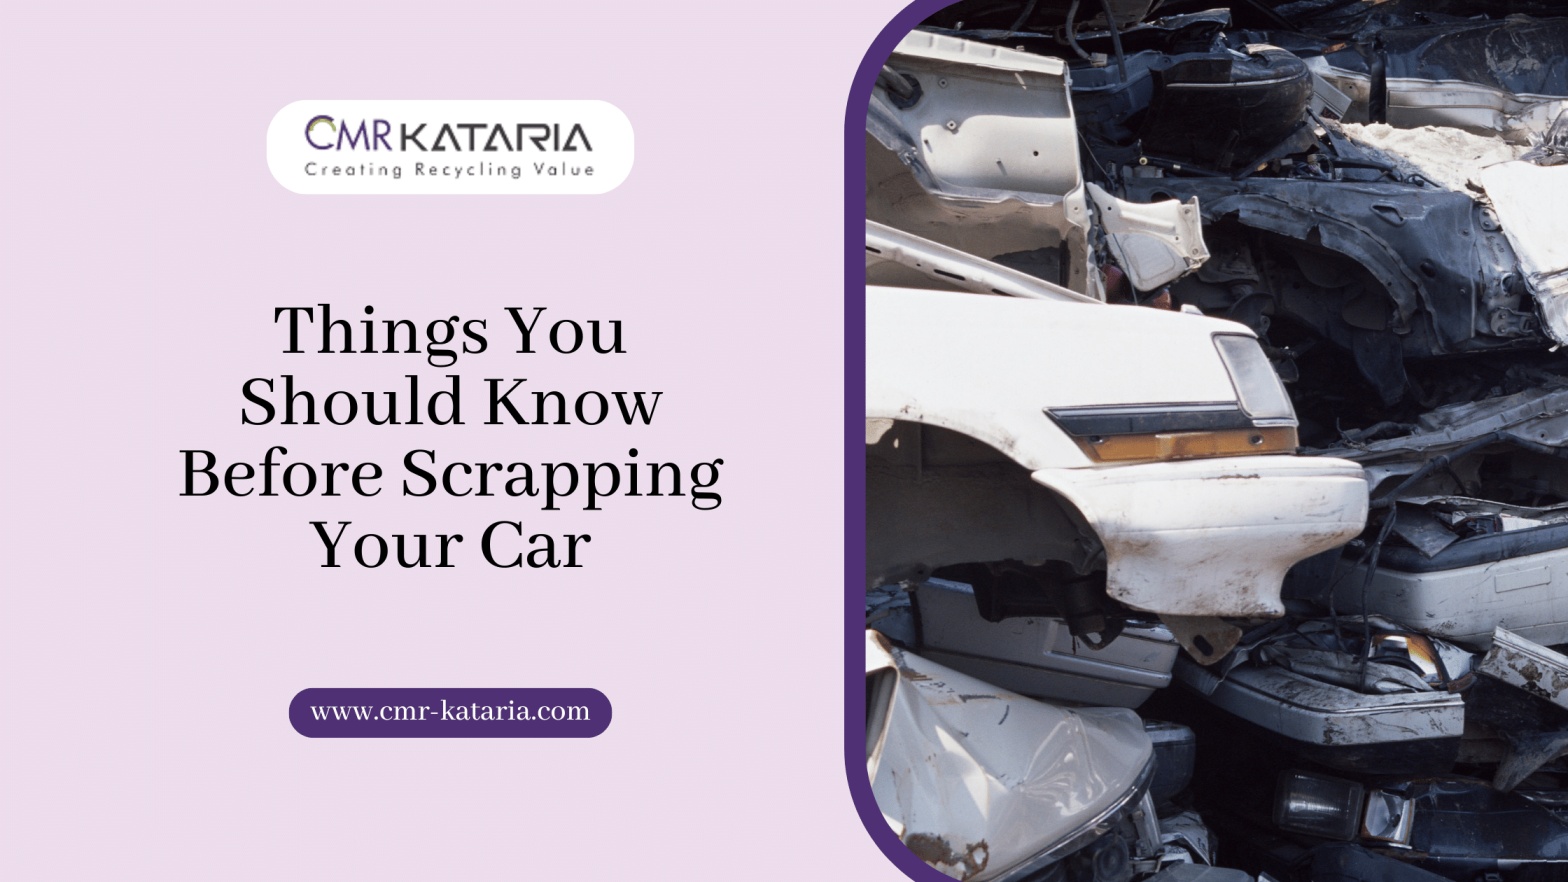 Things You Should Know Before Scrapping Your Car